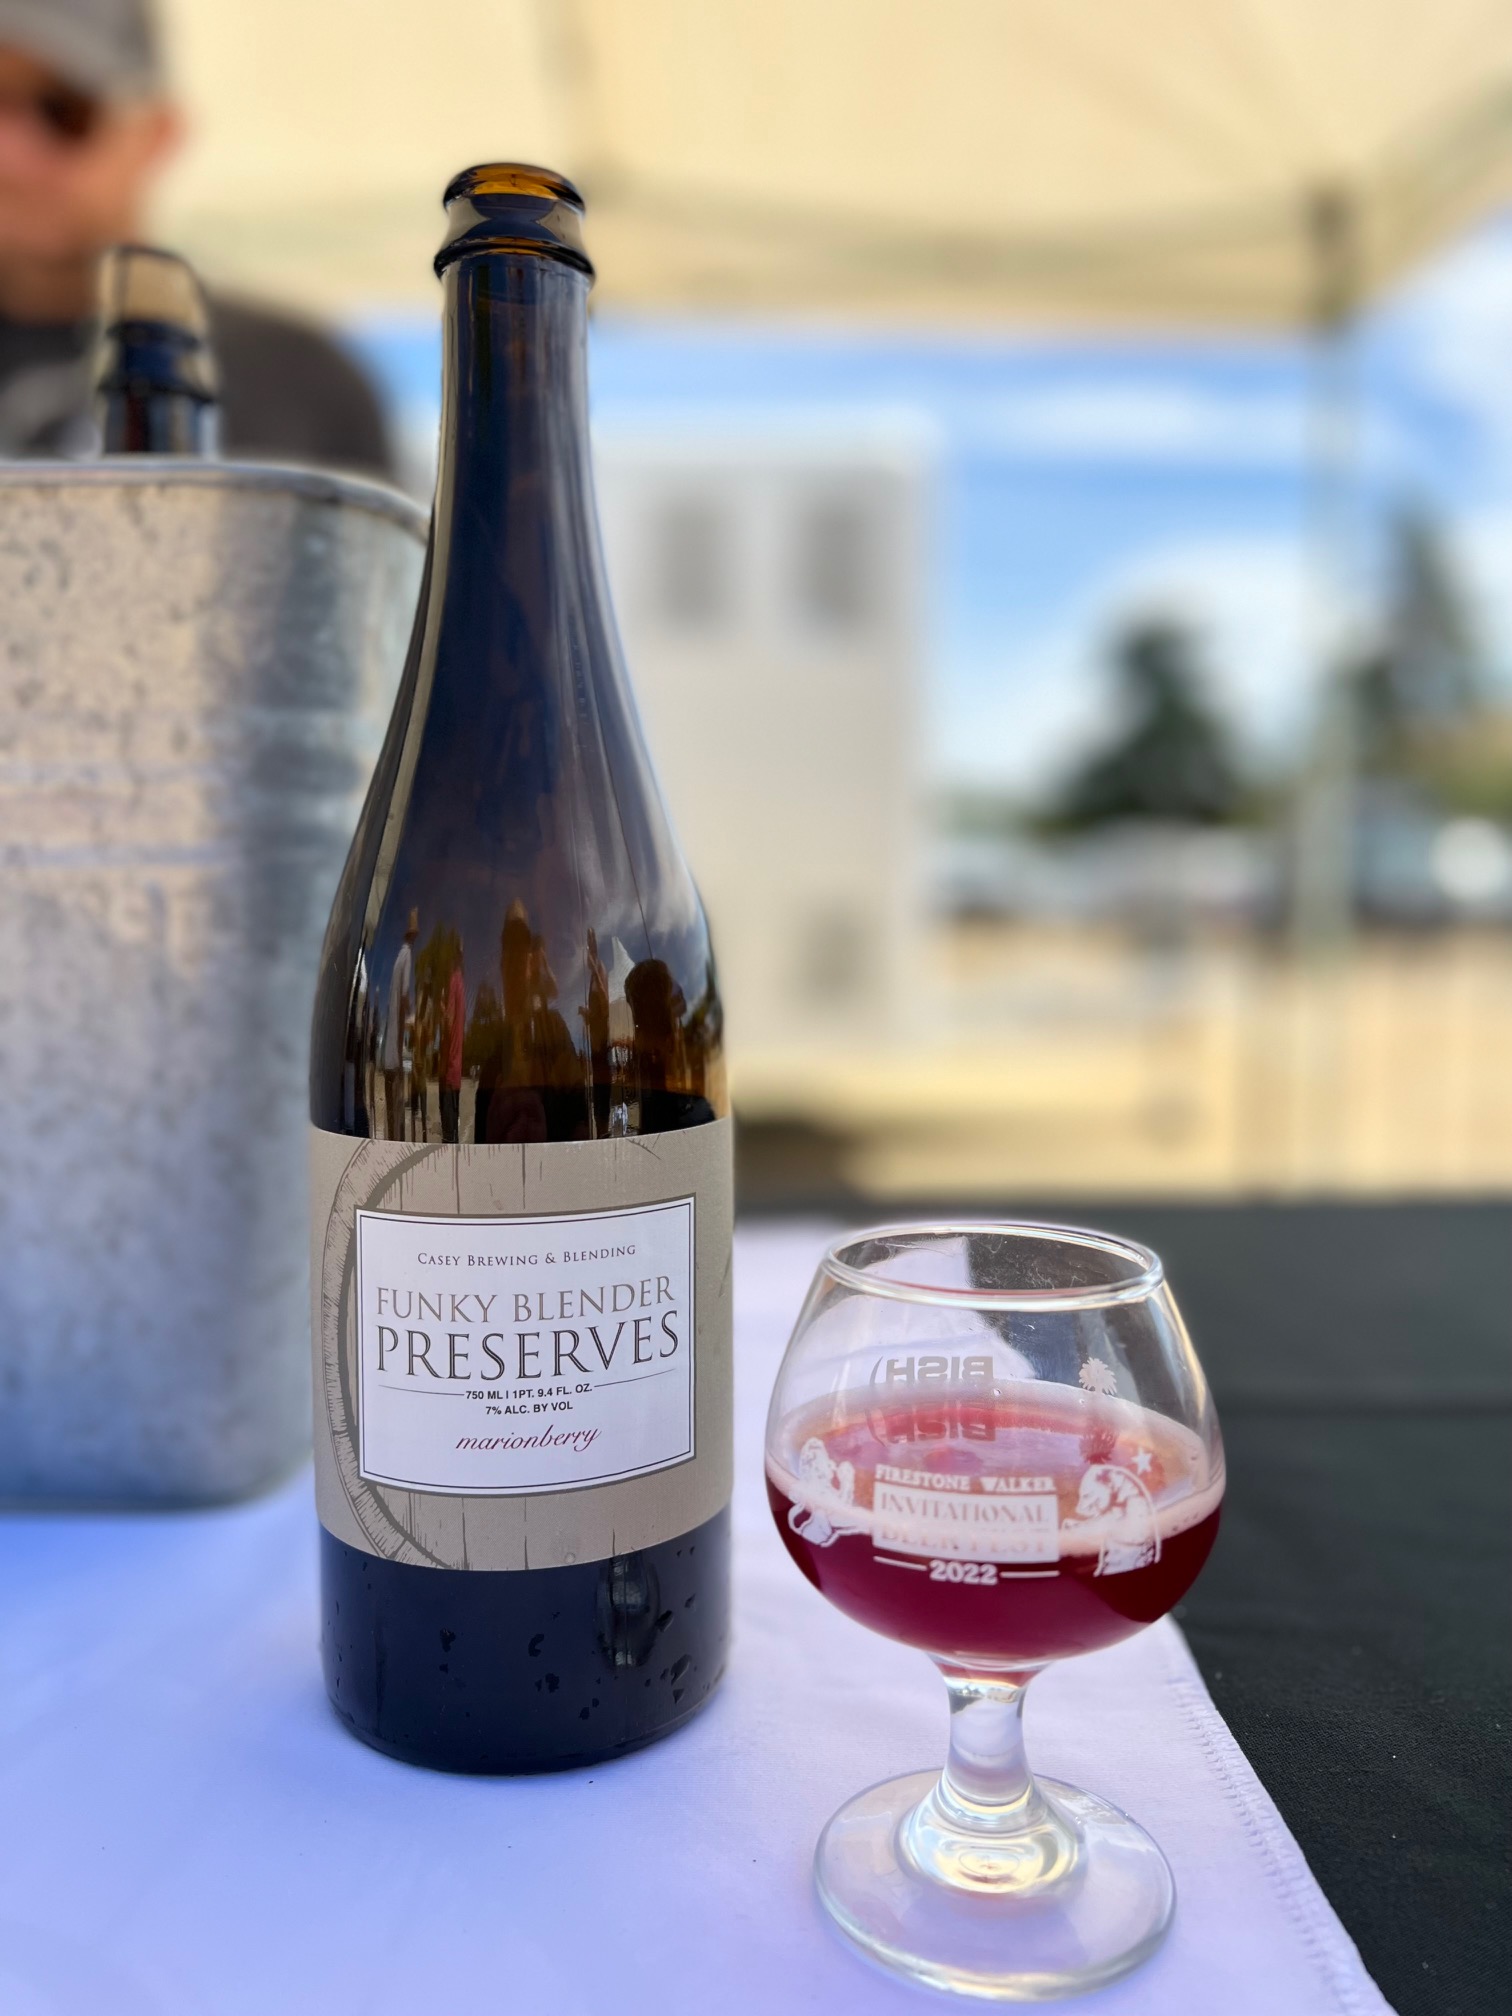 One of our favorite beers at the 2022 Firestone Walker Invitational Beer Fest was Funky Blender Preserves - Marionberry from Casey Brewing.